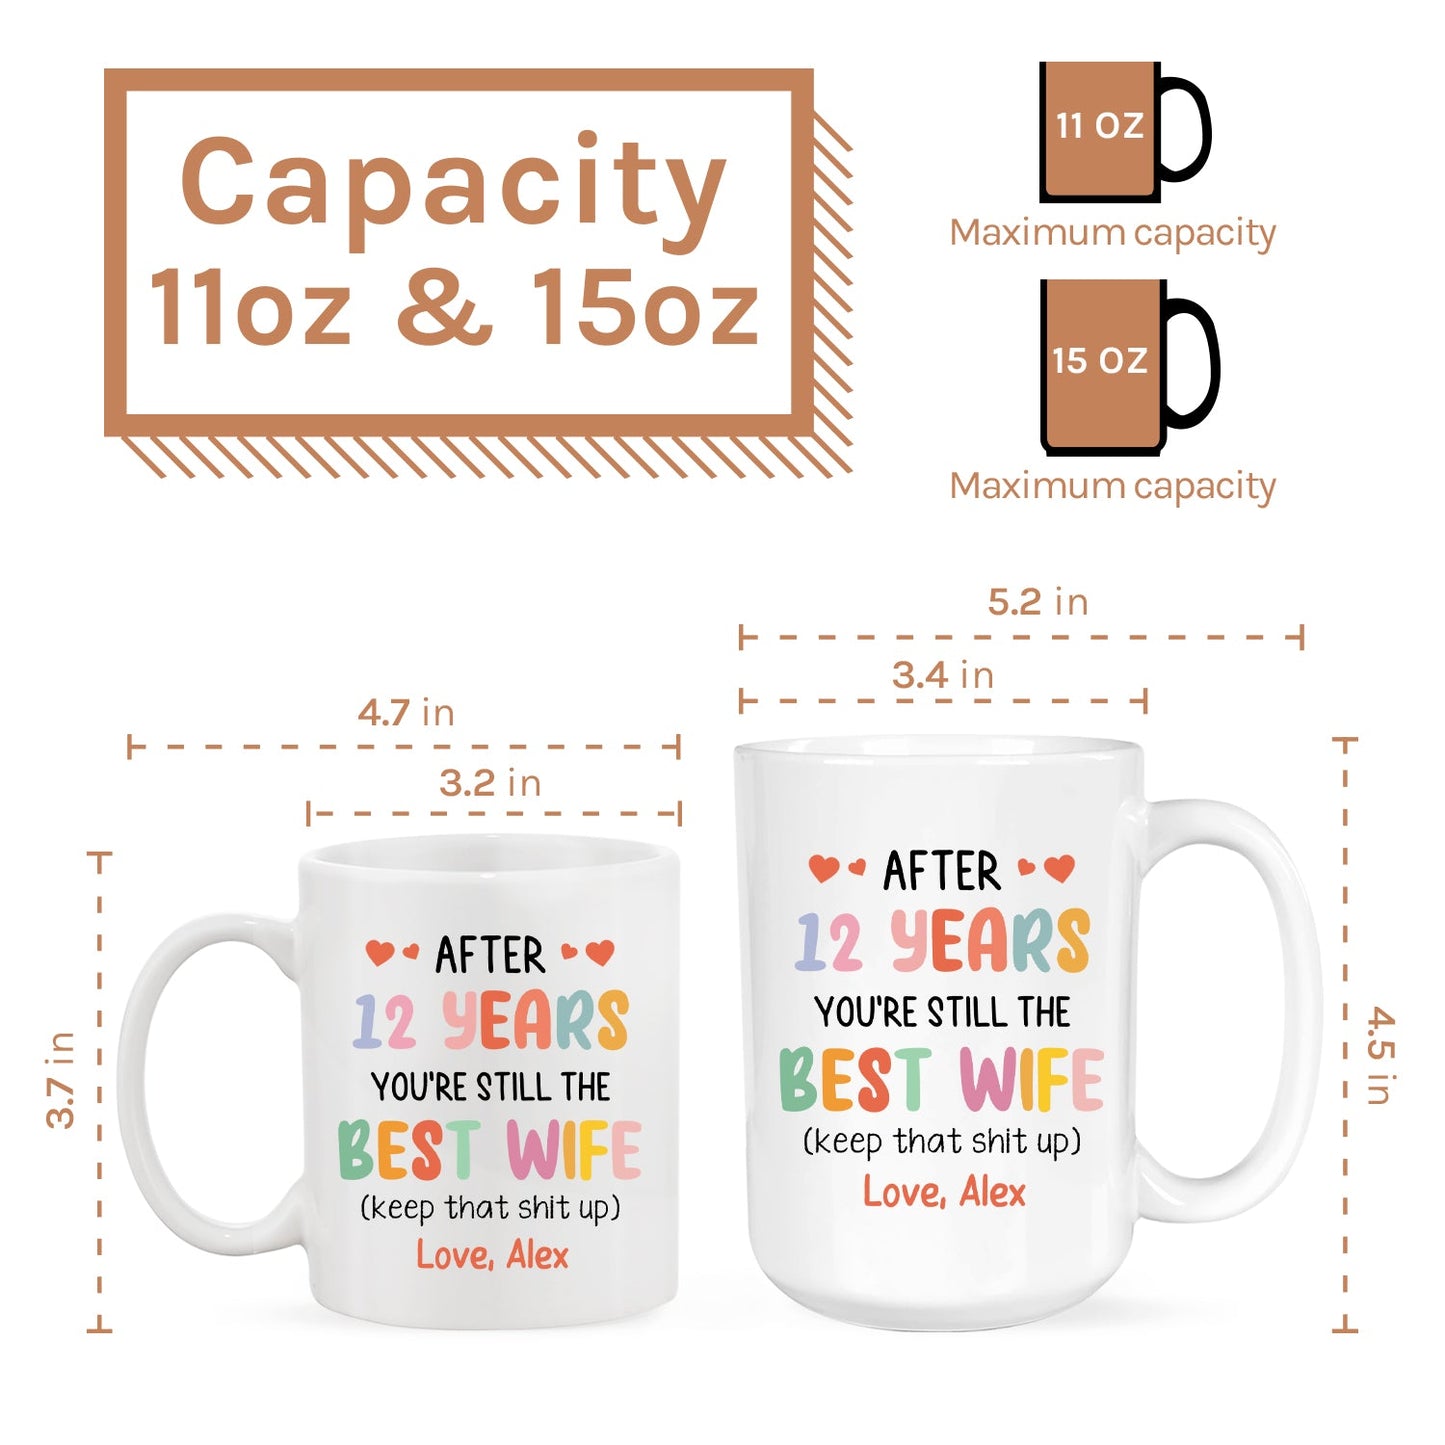 After 12 Years - Personalized 12 Year Anniversary gift for Wife, for Her - Custom Mug - MyMindfulGifts